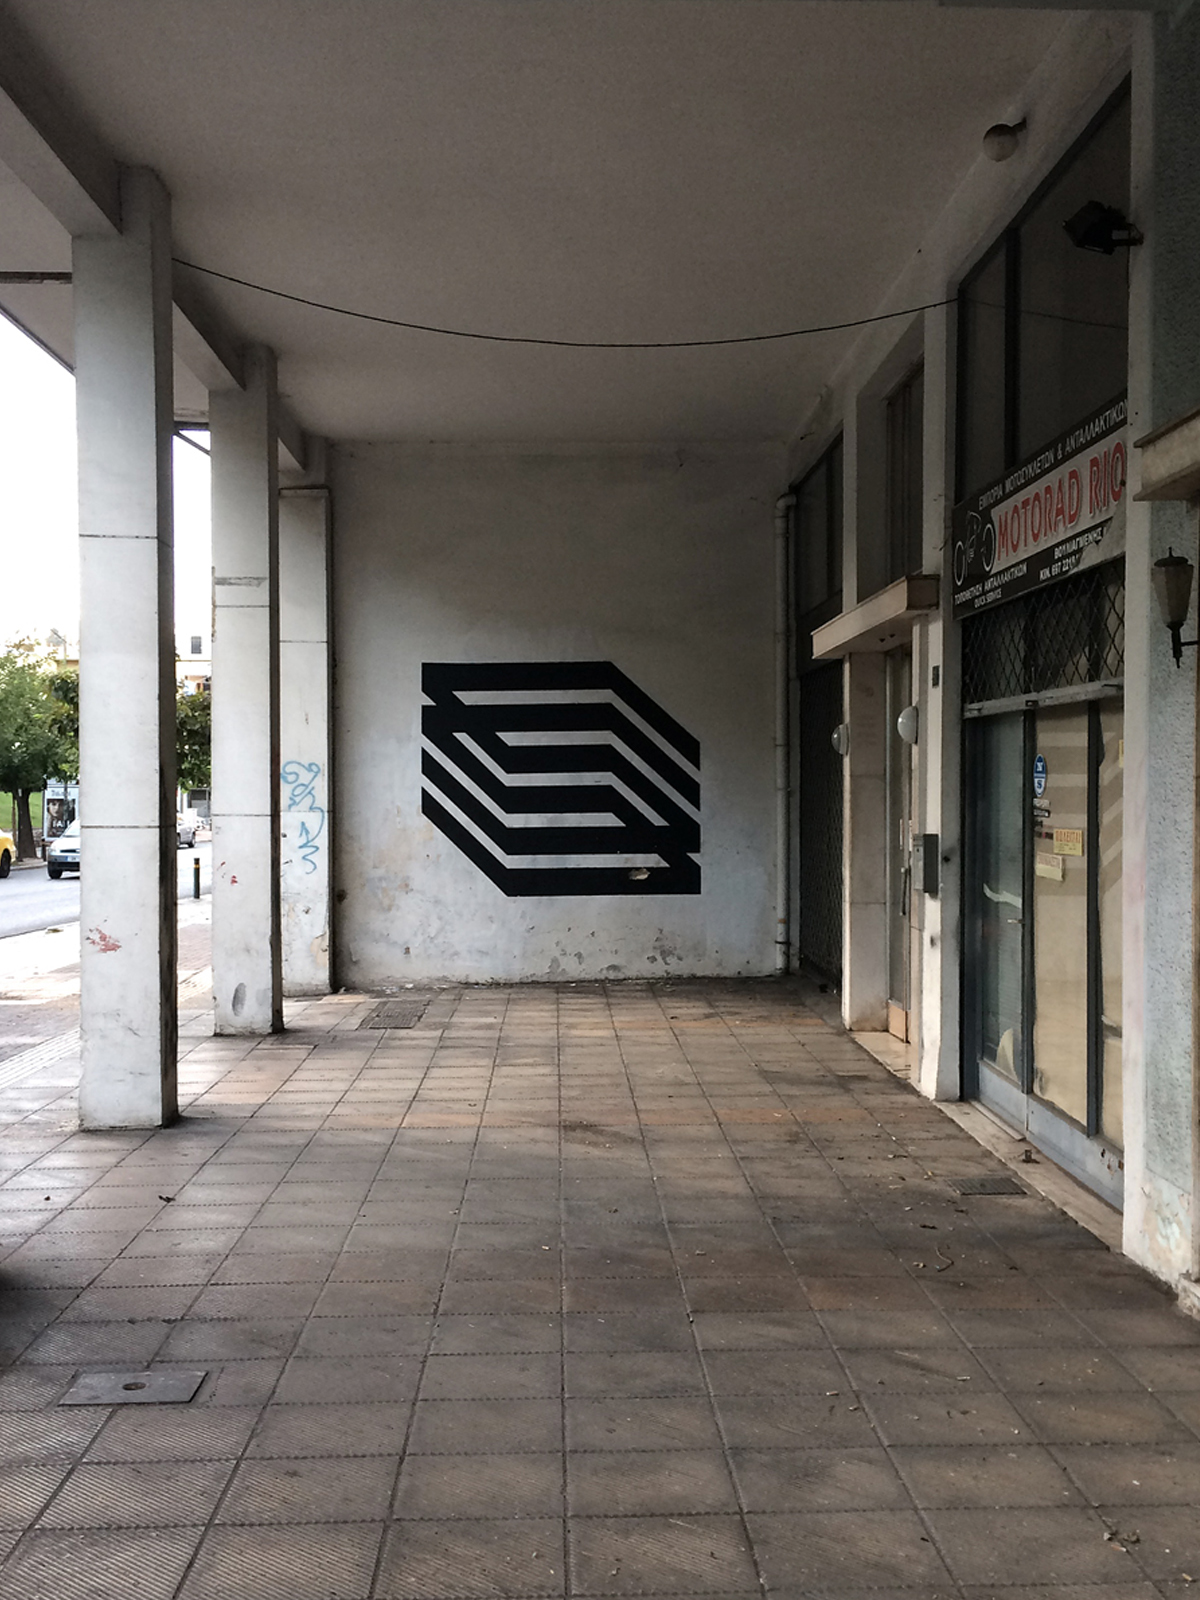 simek Mural geometry lines parallel Forms abstract shapes walls minimal